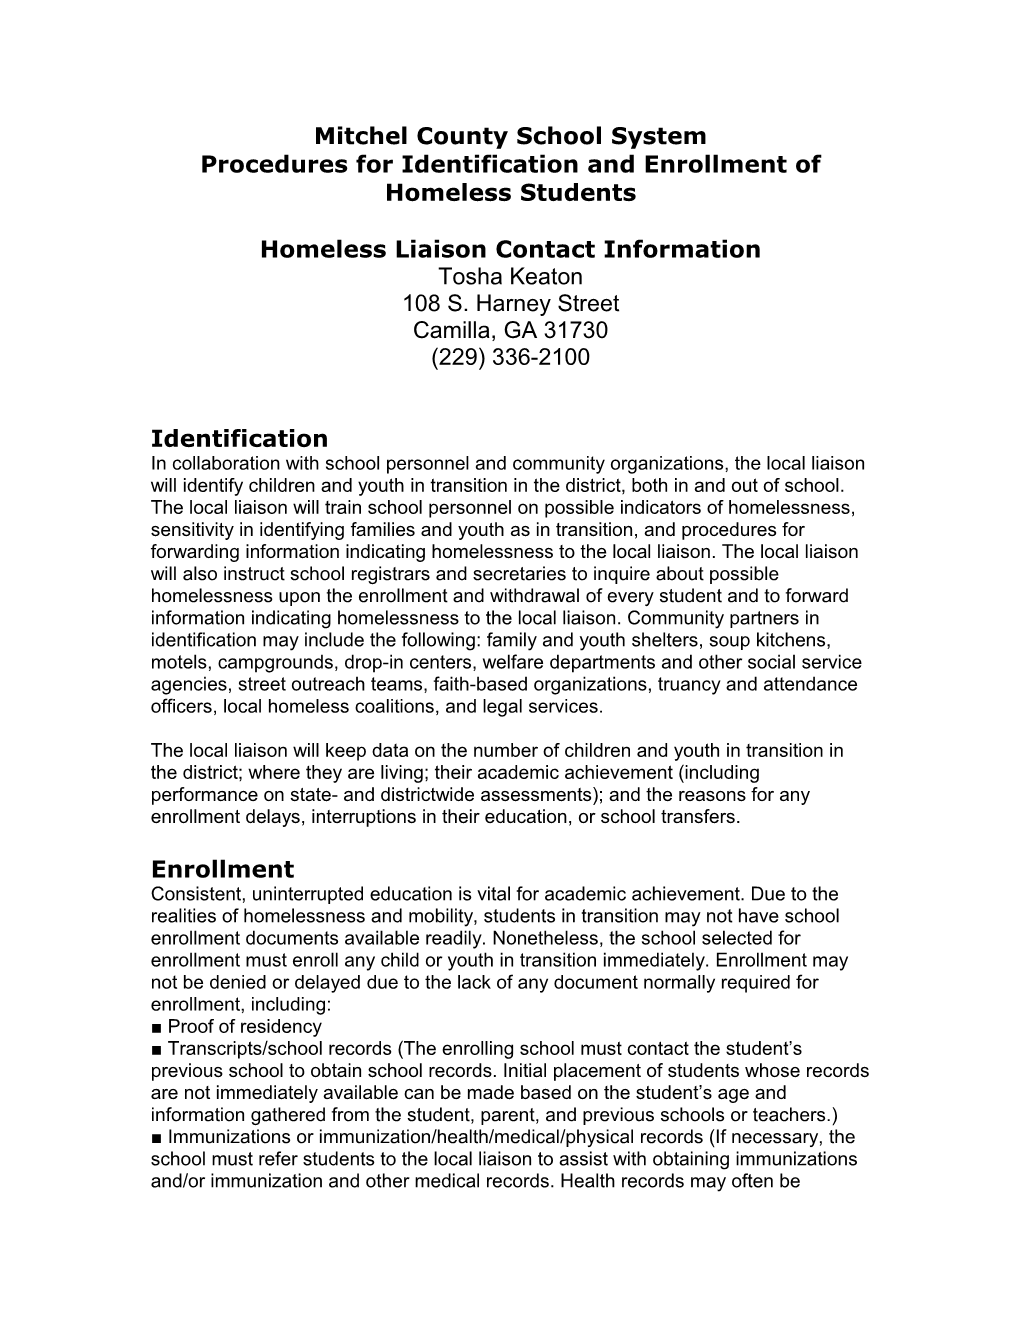 Procedures for Identification and Enrollment of Homeless Students